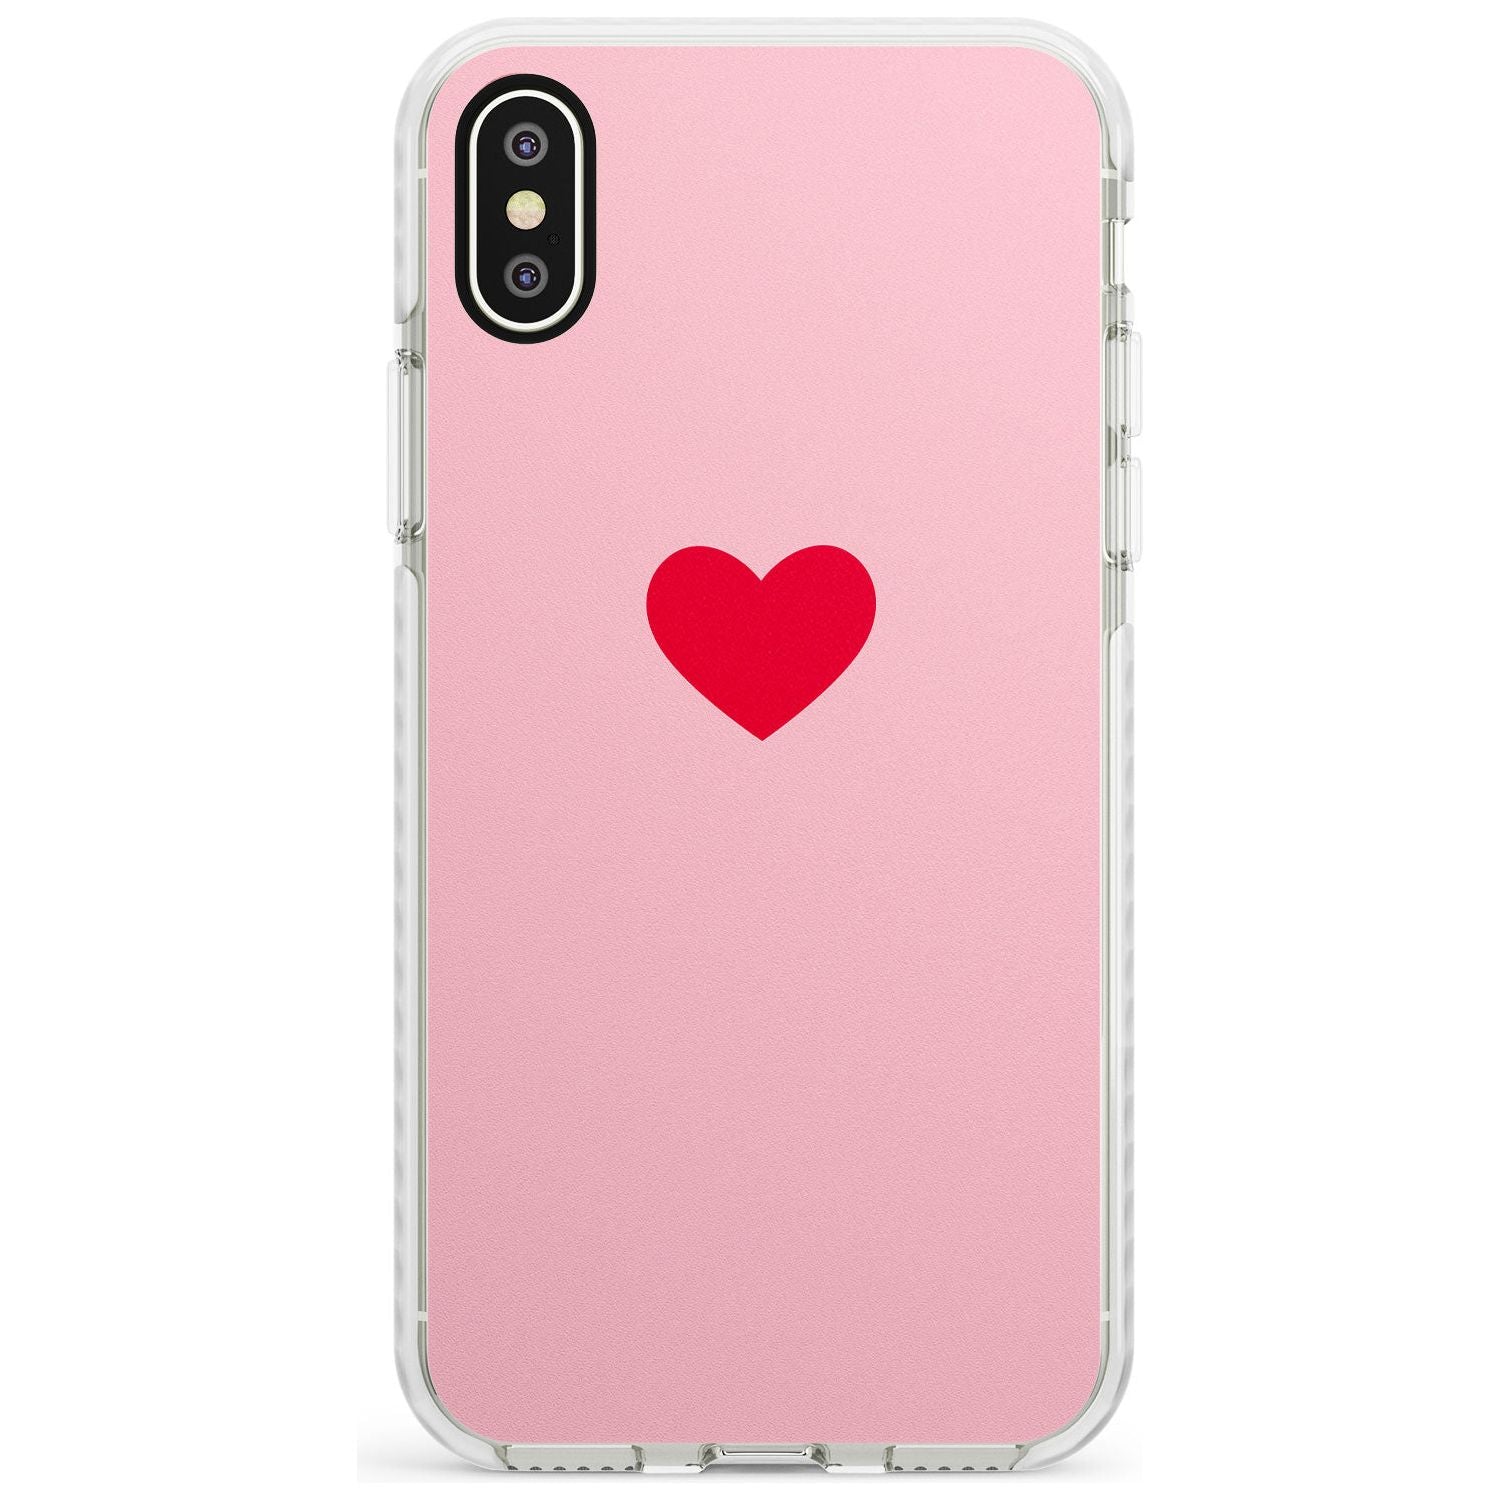 Single Heart Red & Pink Impact Phone Case for iPhone X XS Max XR